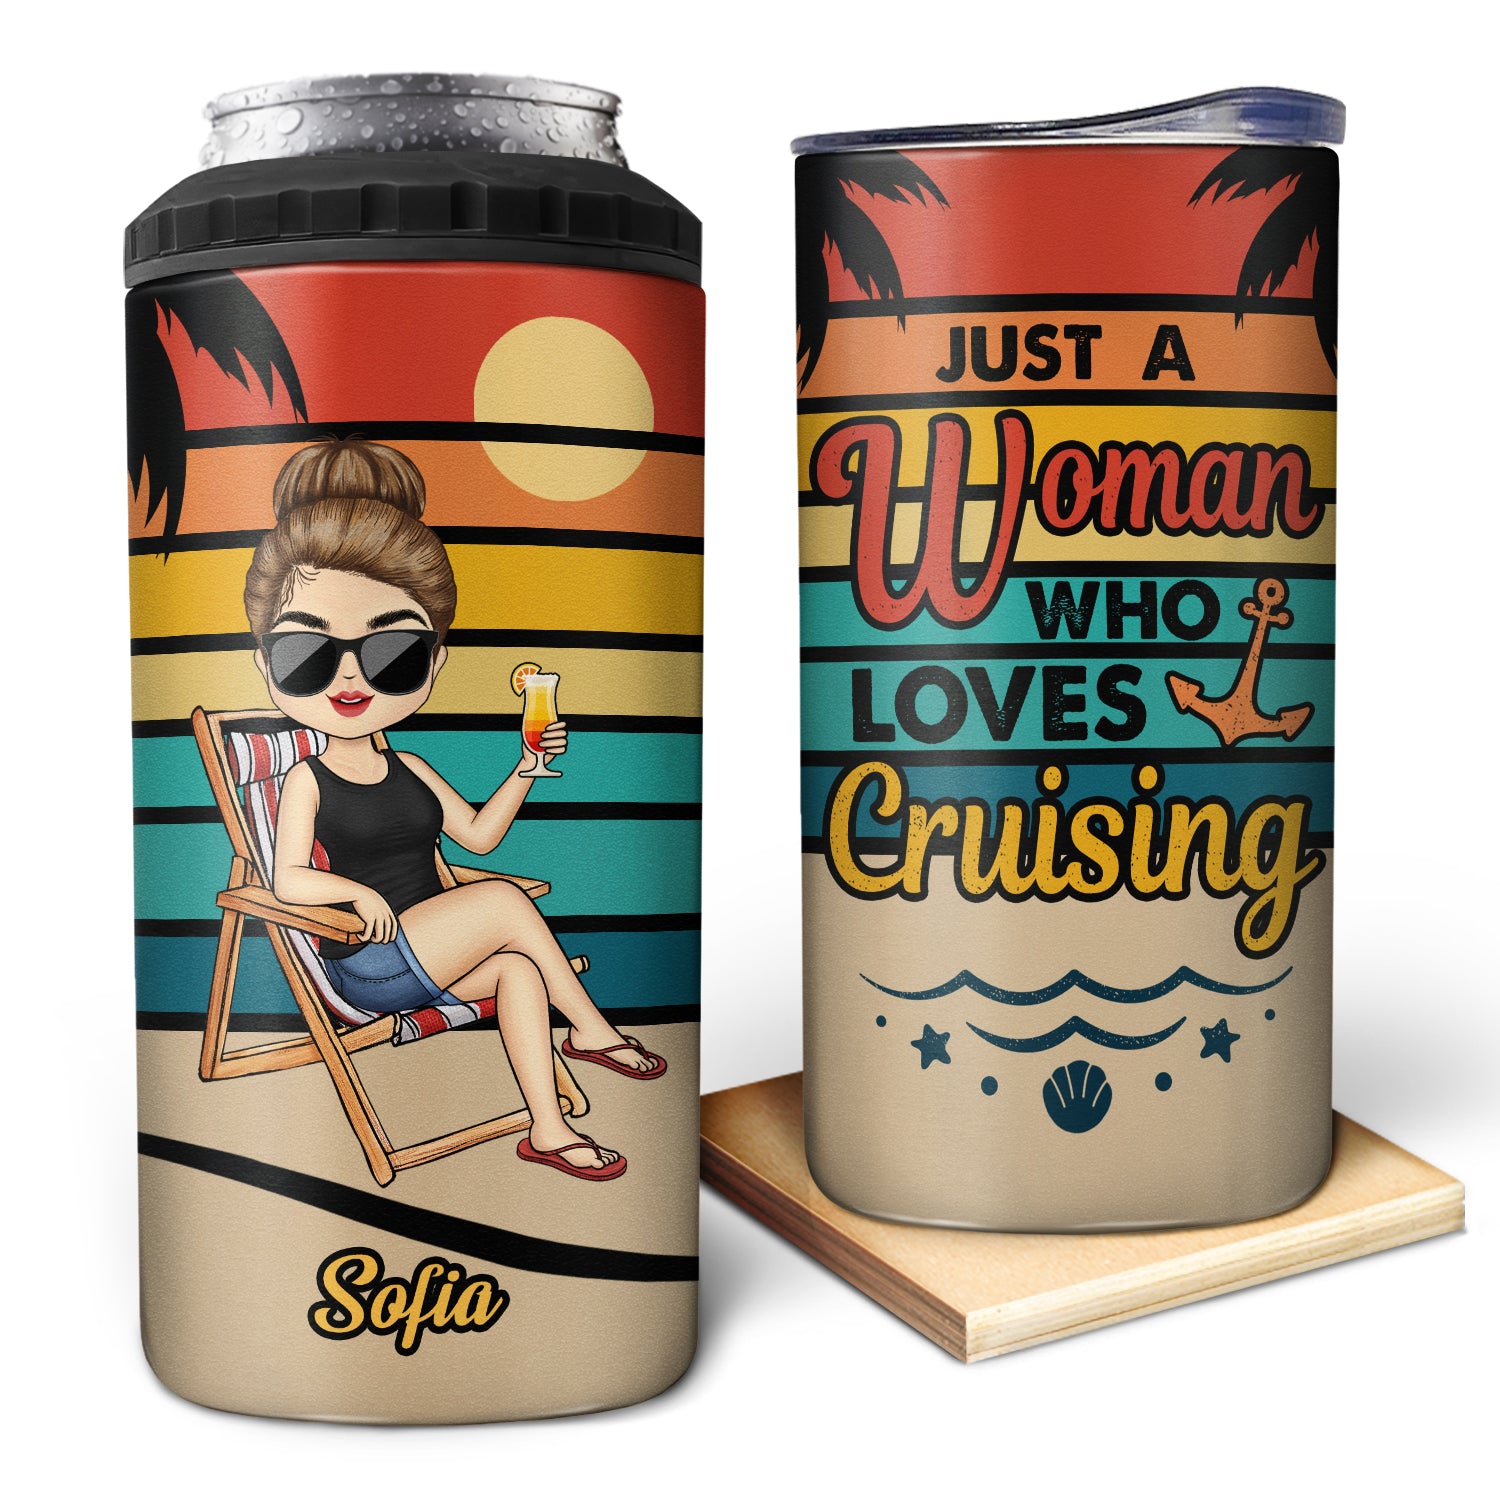 Just A Woman A Man Who Loves Traveling Cruising Beach - Birthday, Vacation Gift For Yourself, Women, Men - Personalized Custom 4 In 1 Can Cooler Tumbler